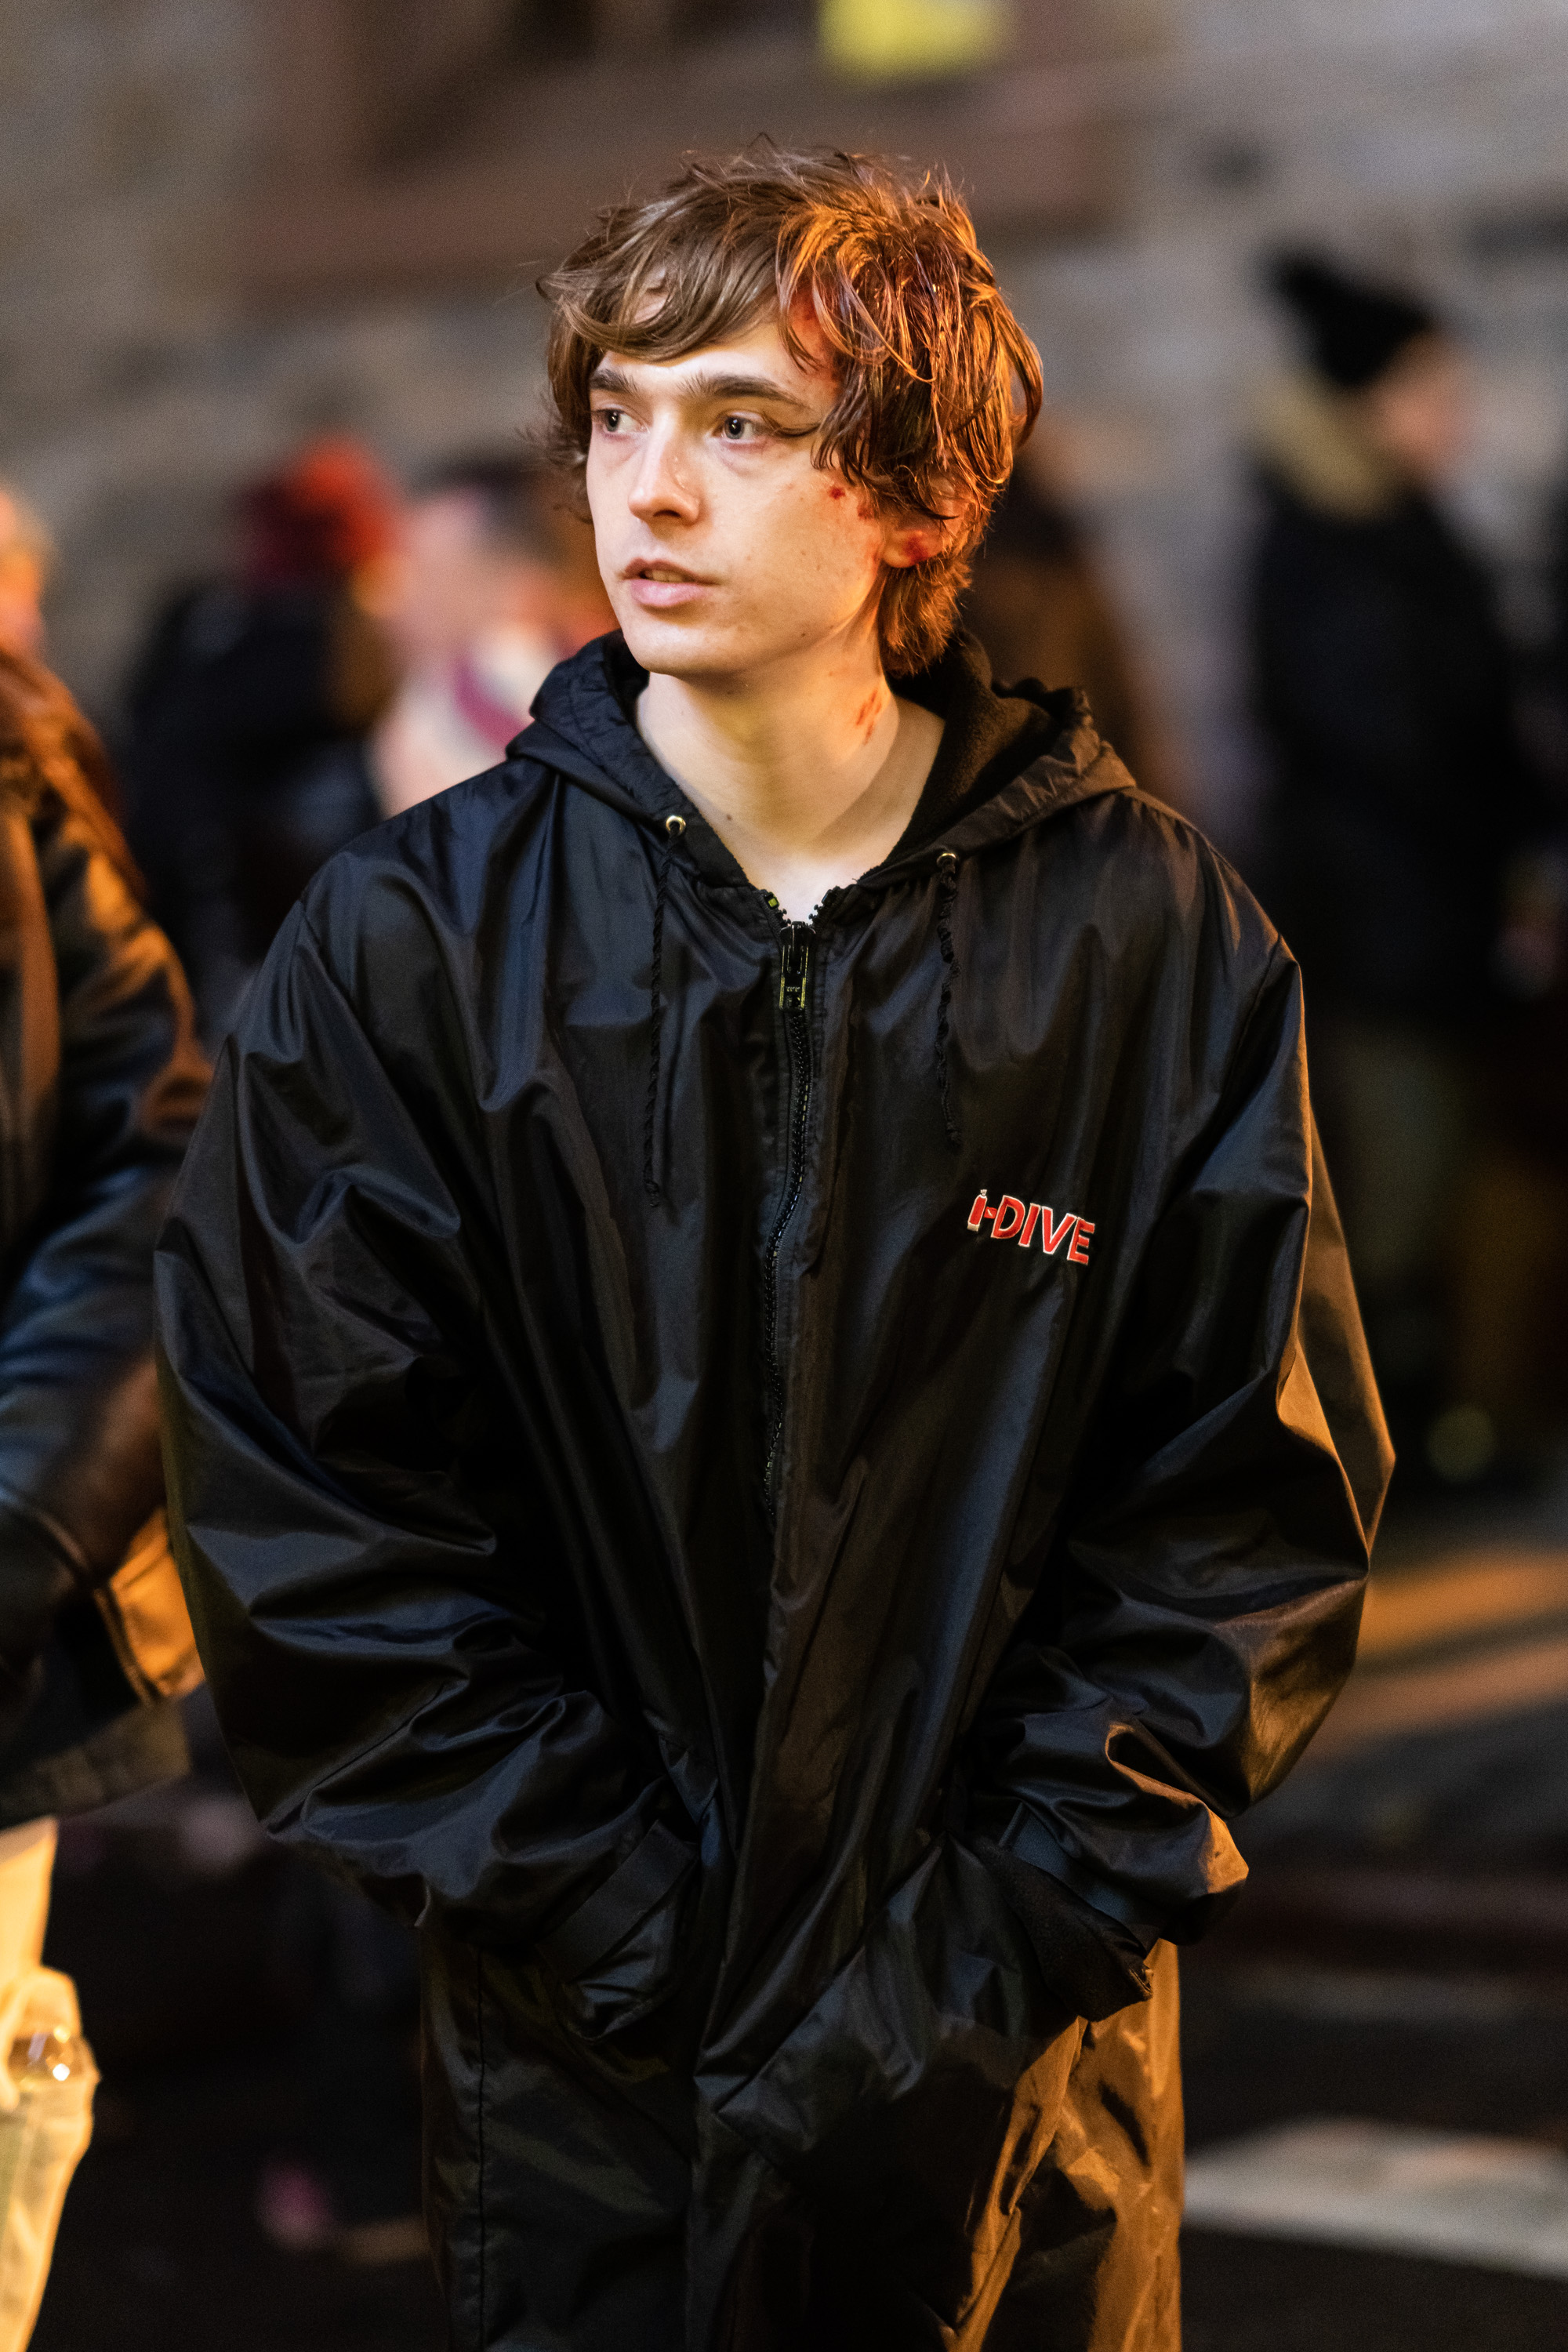 Austin Abrams during the filming of 'Wolves' in Chinatown on February 6, 2023, in New York City. | Source: Getty Images